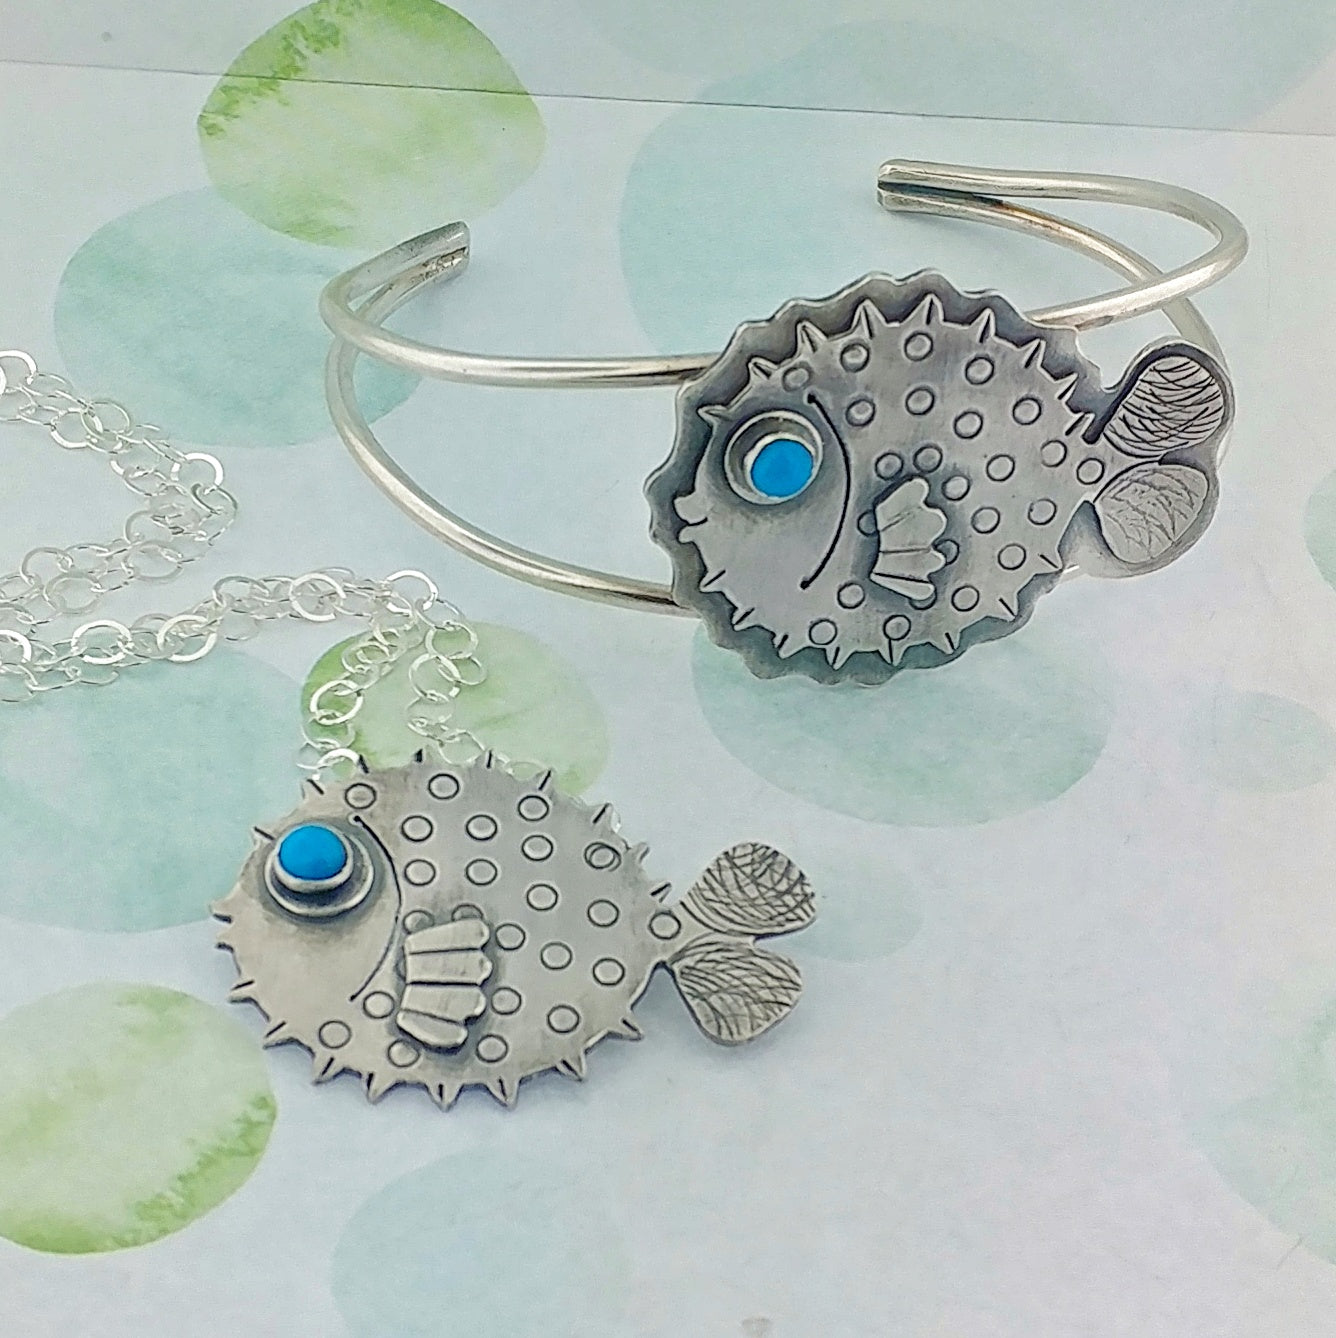 Puffer fish bracelet and necklace as options